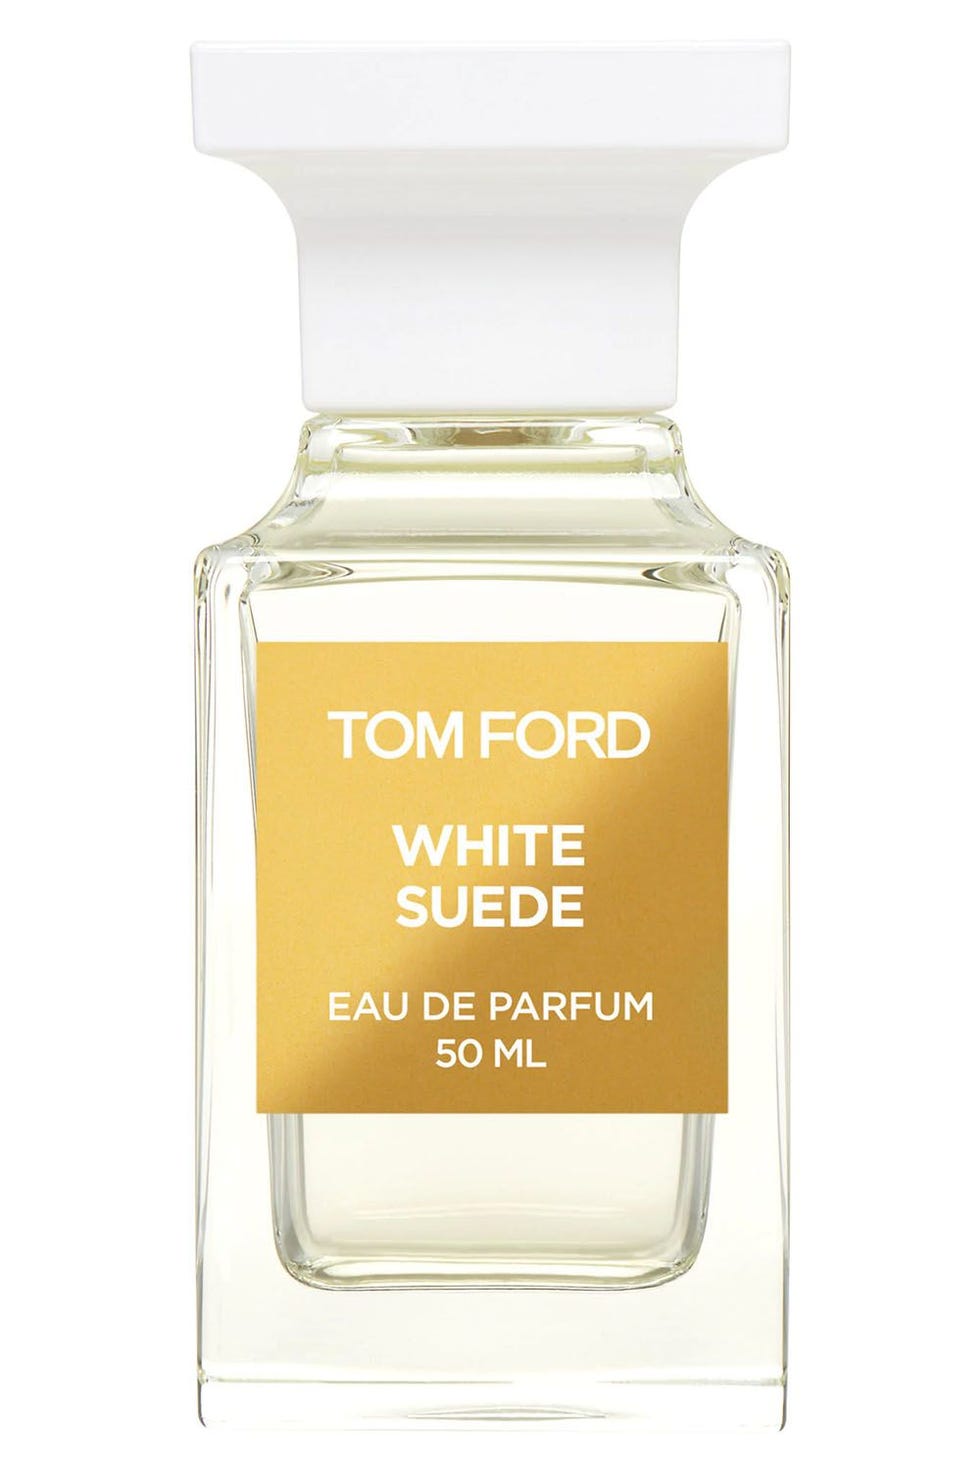 Perfumes for fall: Scents from Maison Margiela, Jo Malone and Tom Ford